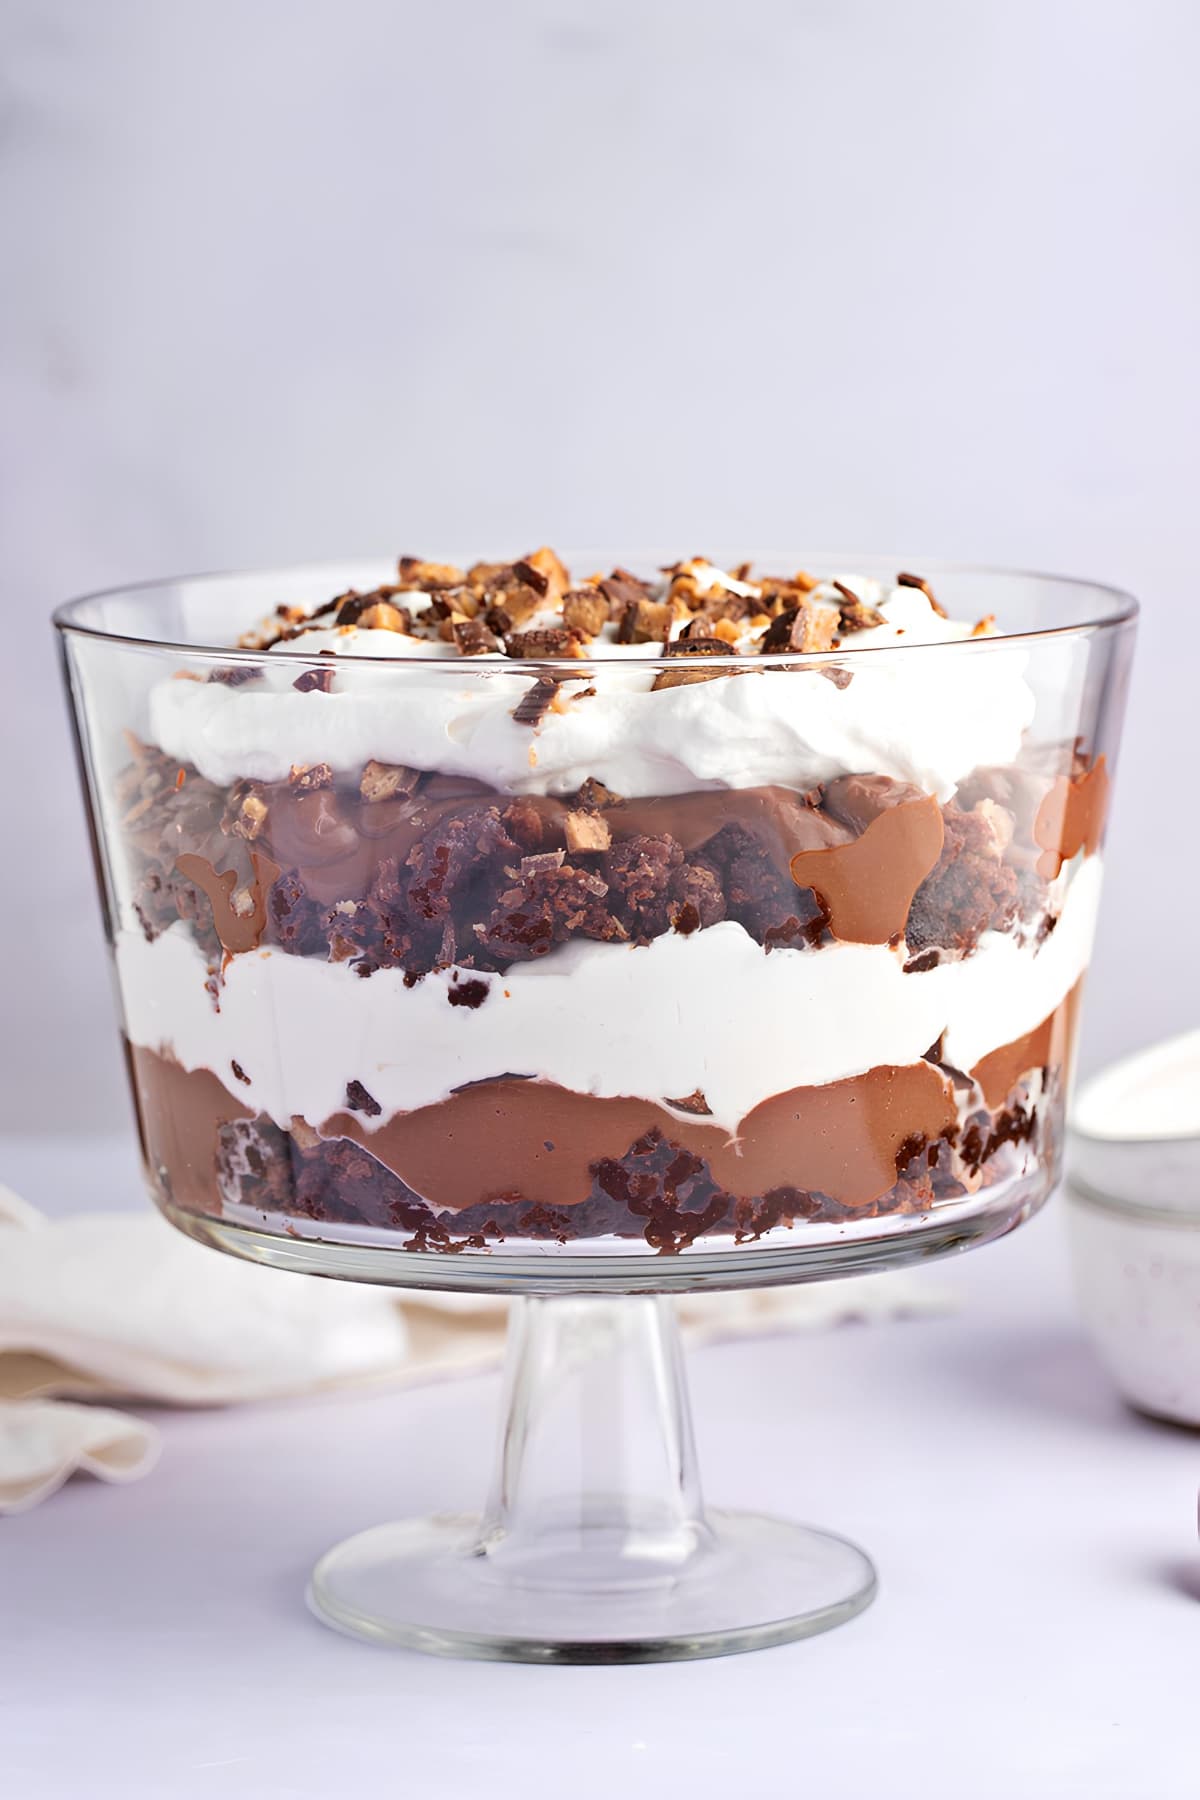 Death By Chocolate with Brownies, Whipped Cream and Crushed Toffee Bars